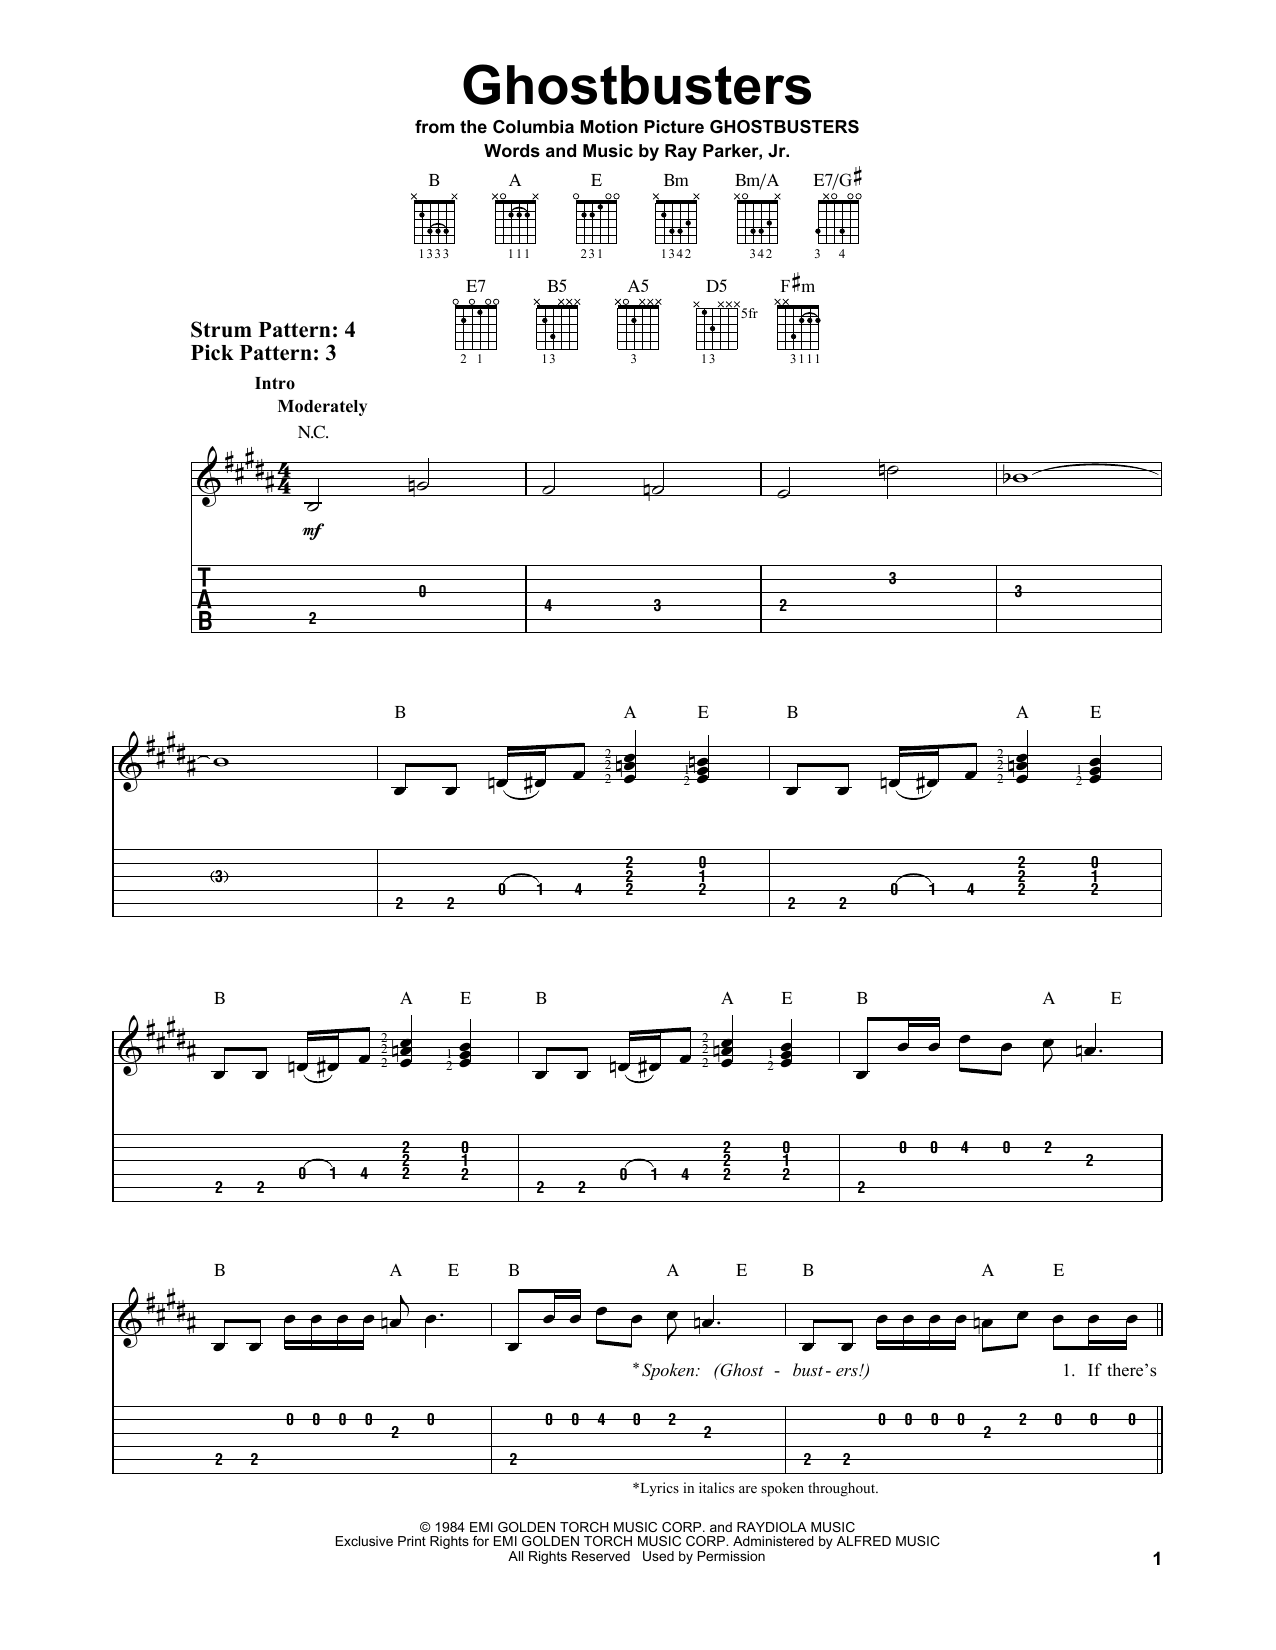 Download Ray Parker Jr. Ghostbusters Sheet Music